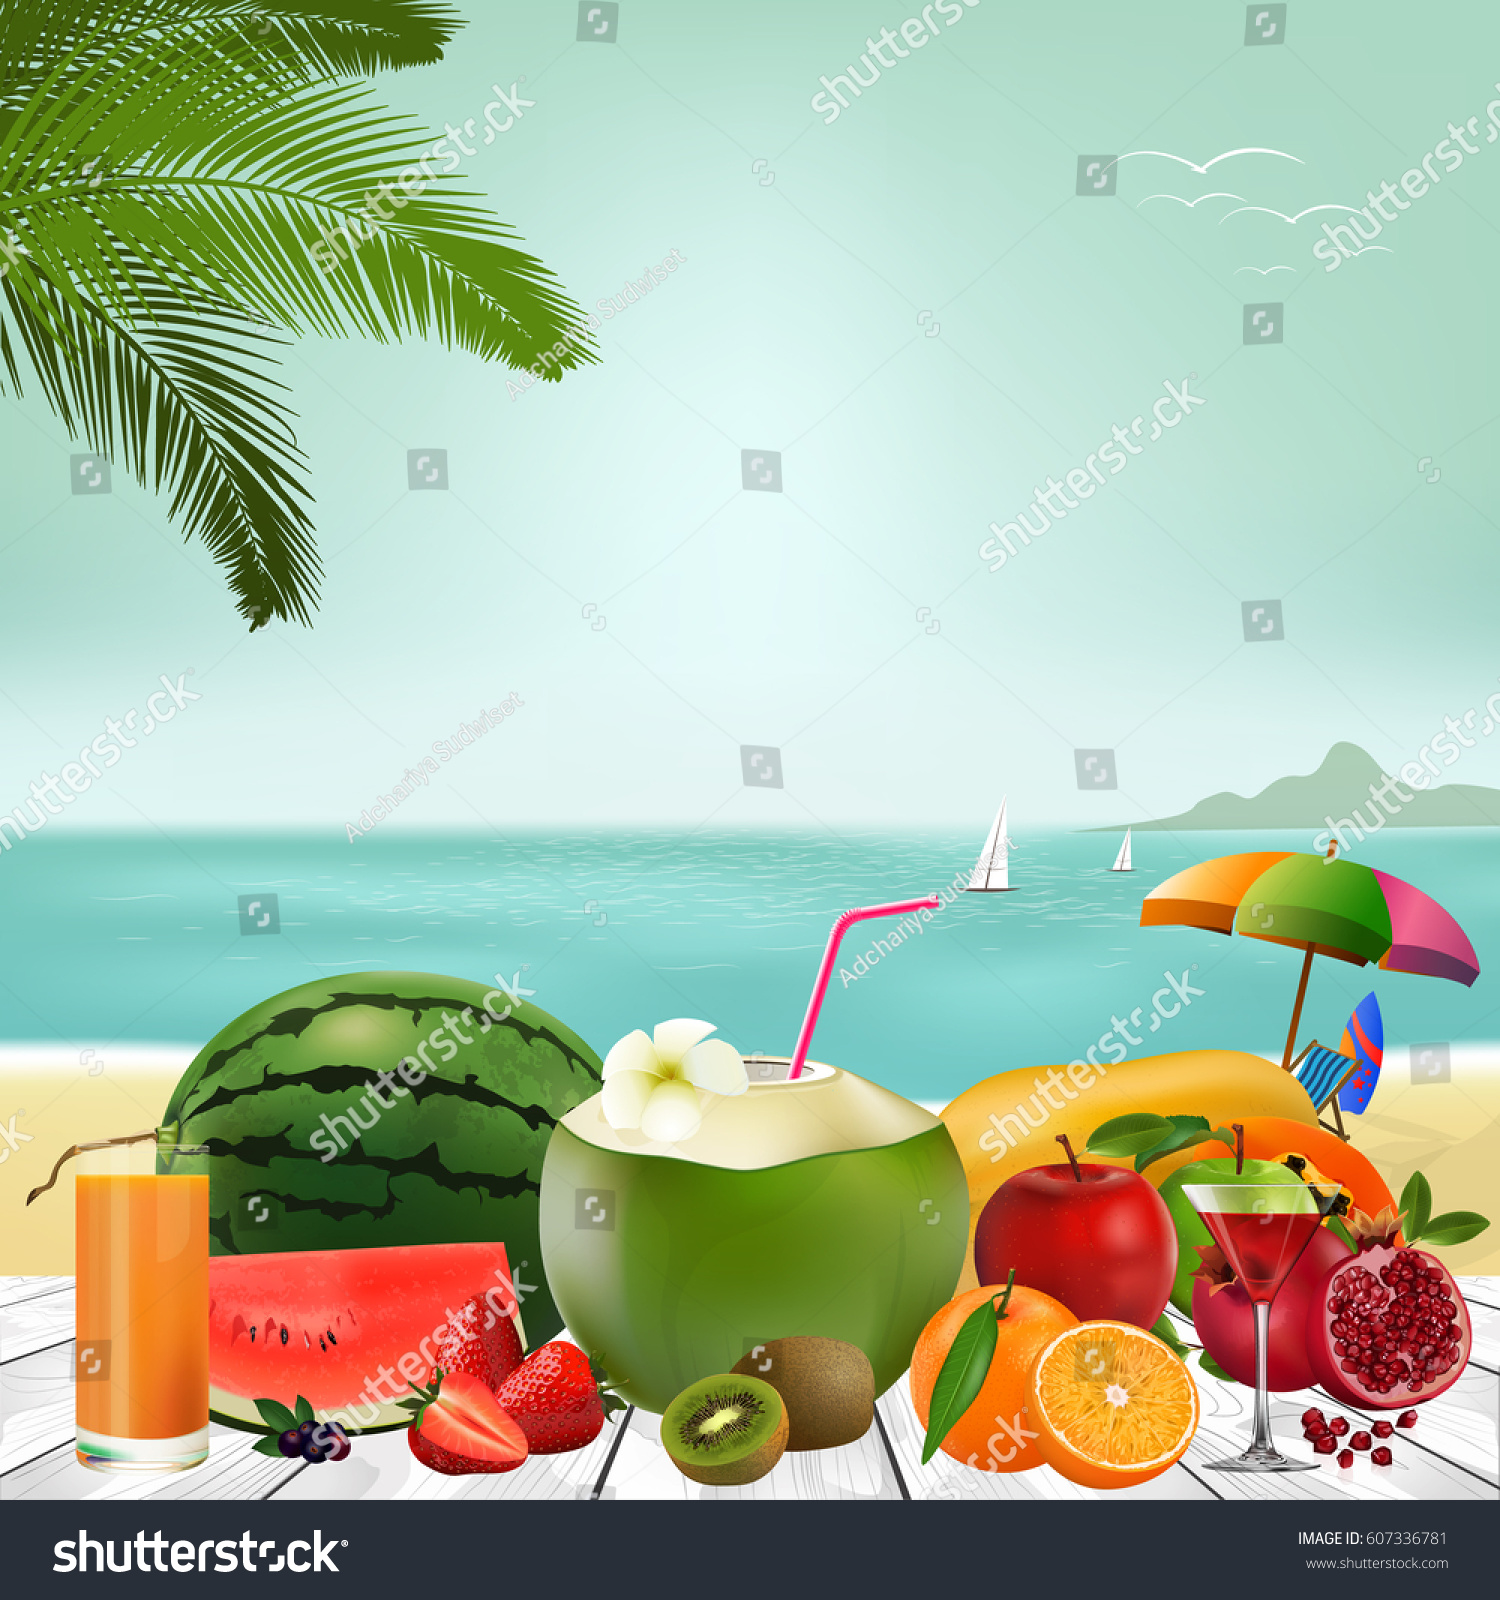 Fruits Cocktail Tropical Fruit Fresh Juice Stock Vector Royalty Free 607336781 Shutterstock 8323